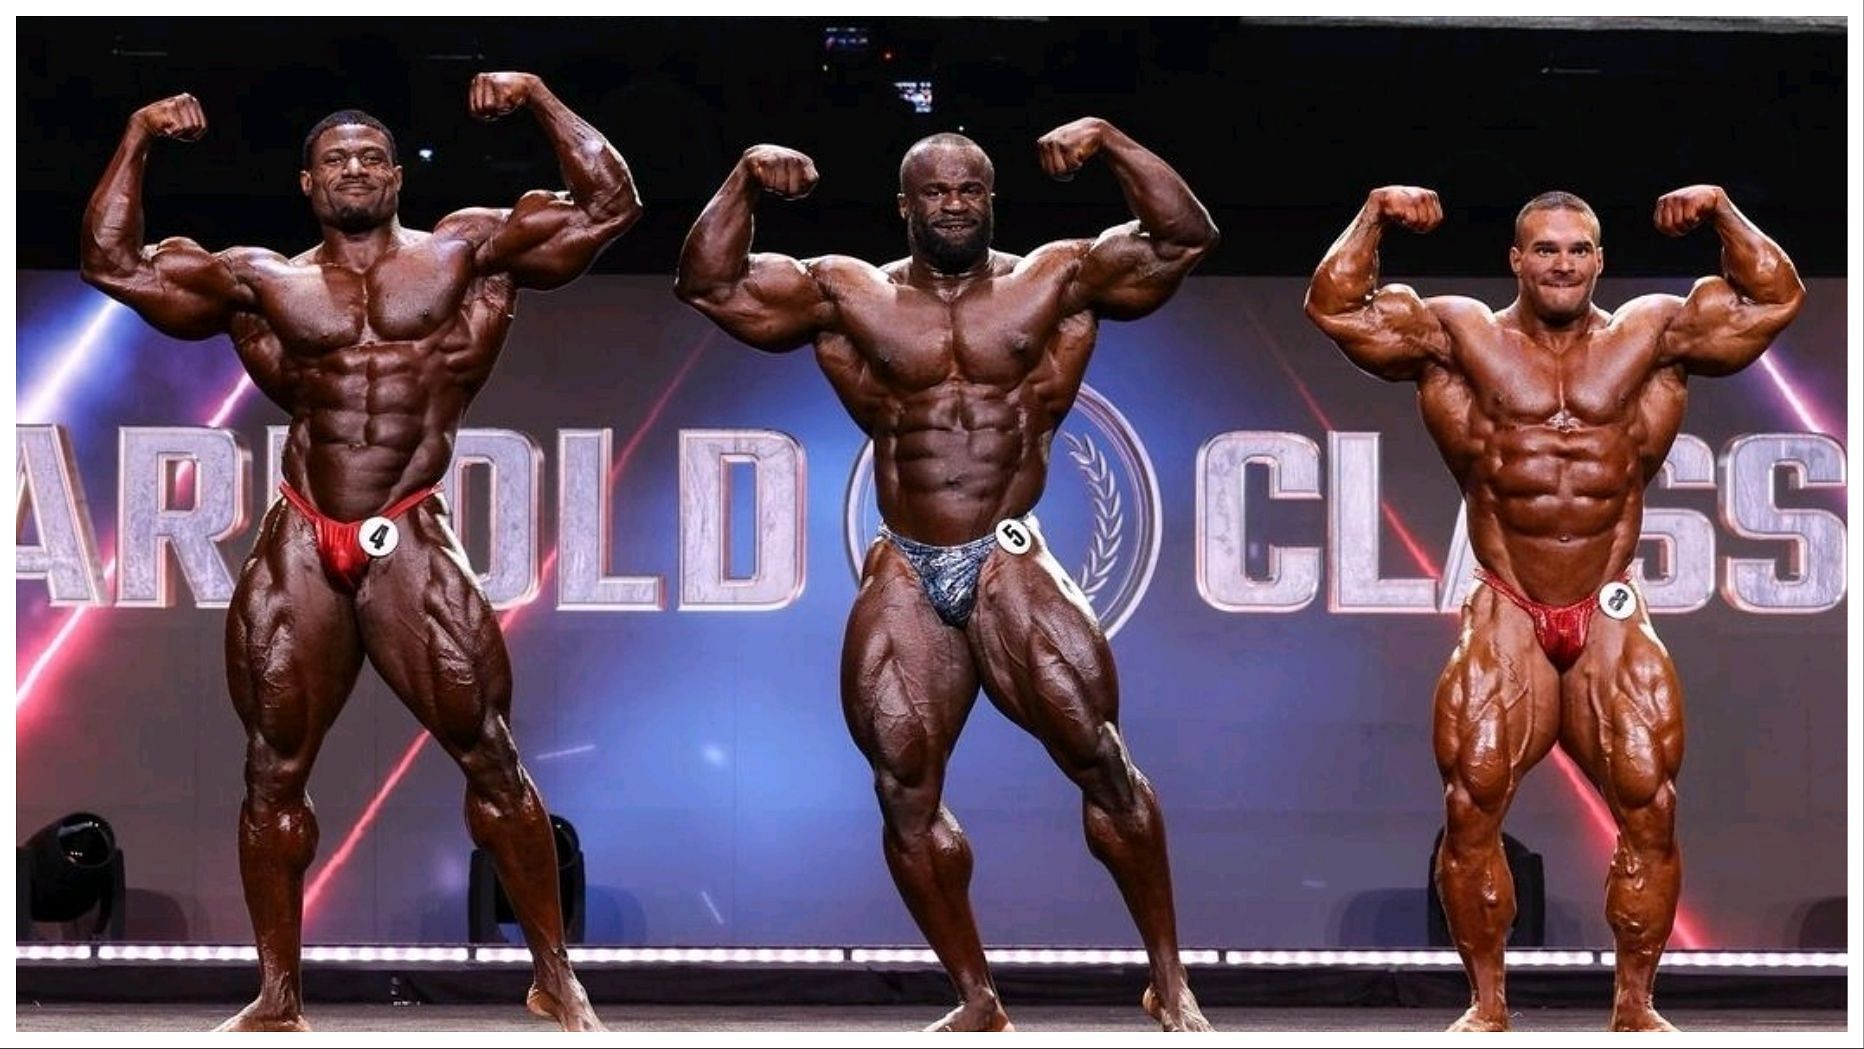 Mr. Olympia 2023 Classic Physique Pre-Judging Results Are Out And